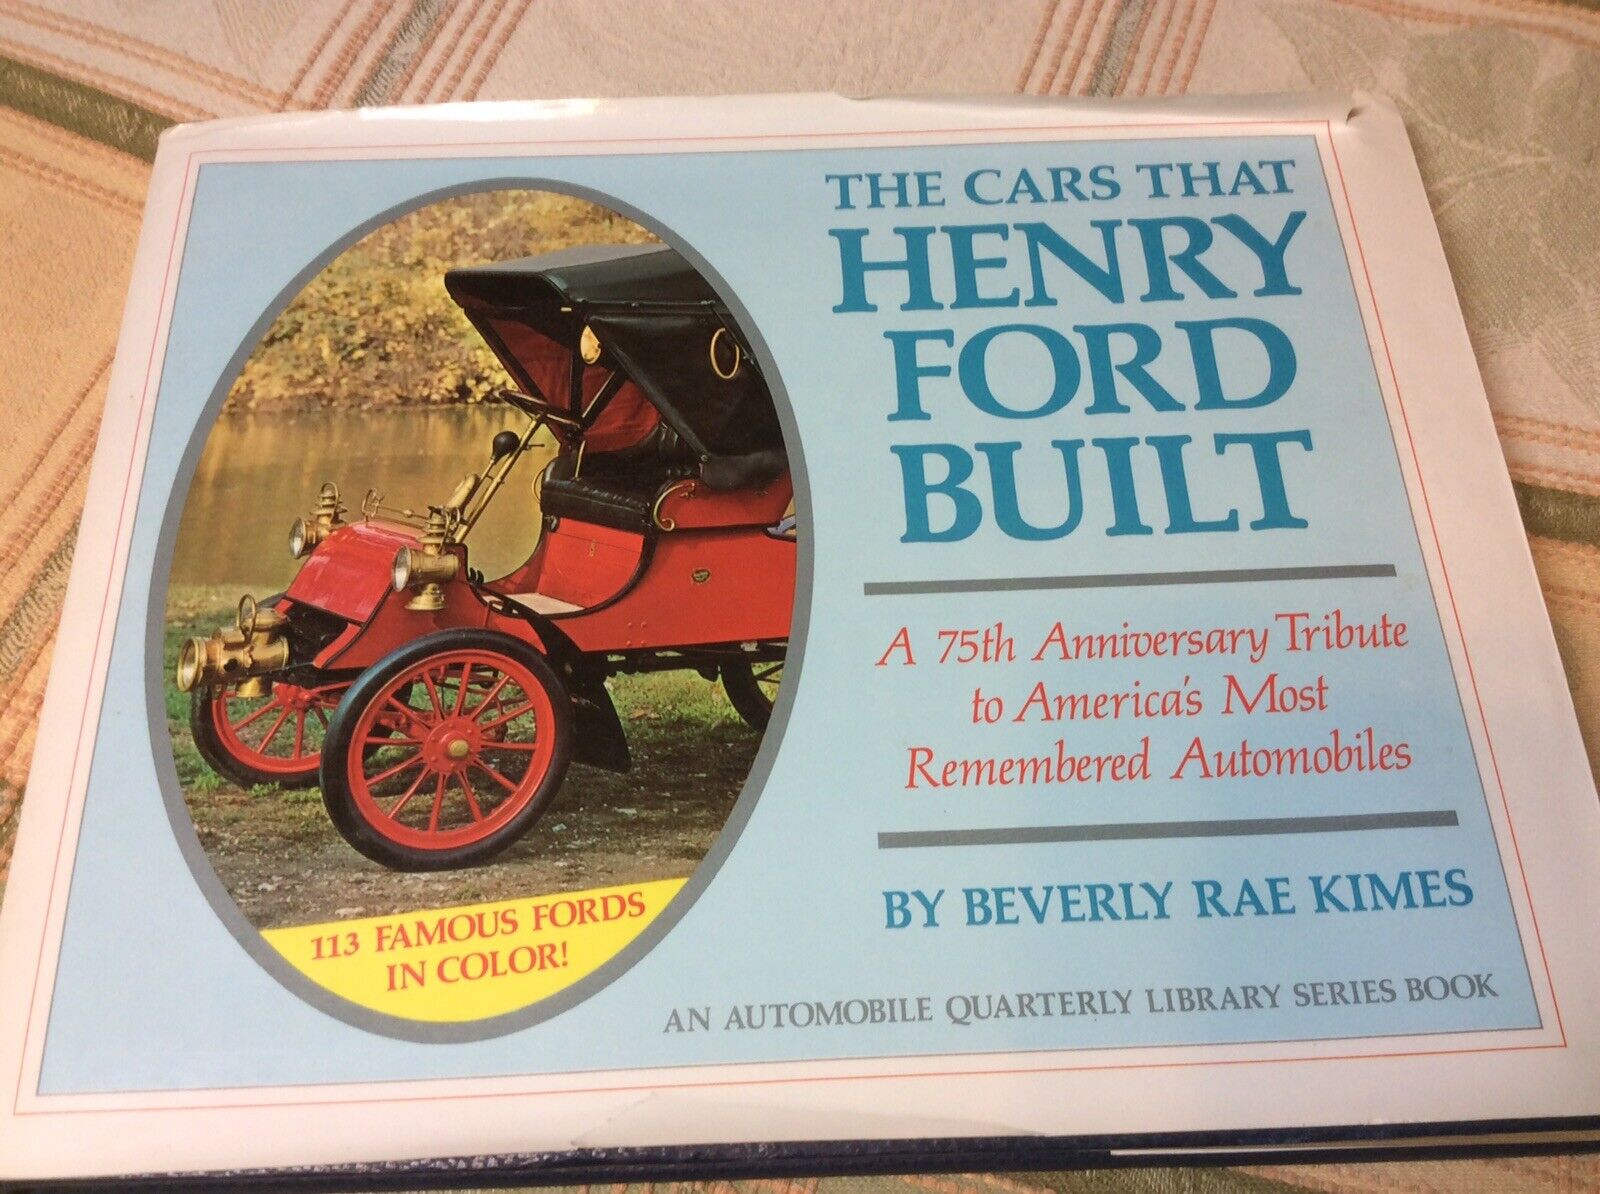 The Cars That Henry Ford Built by Beverly Kimes